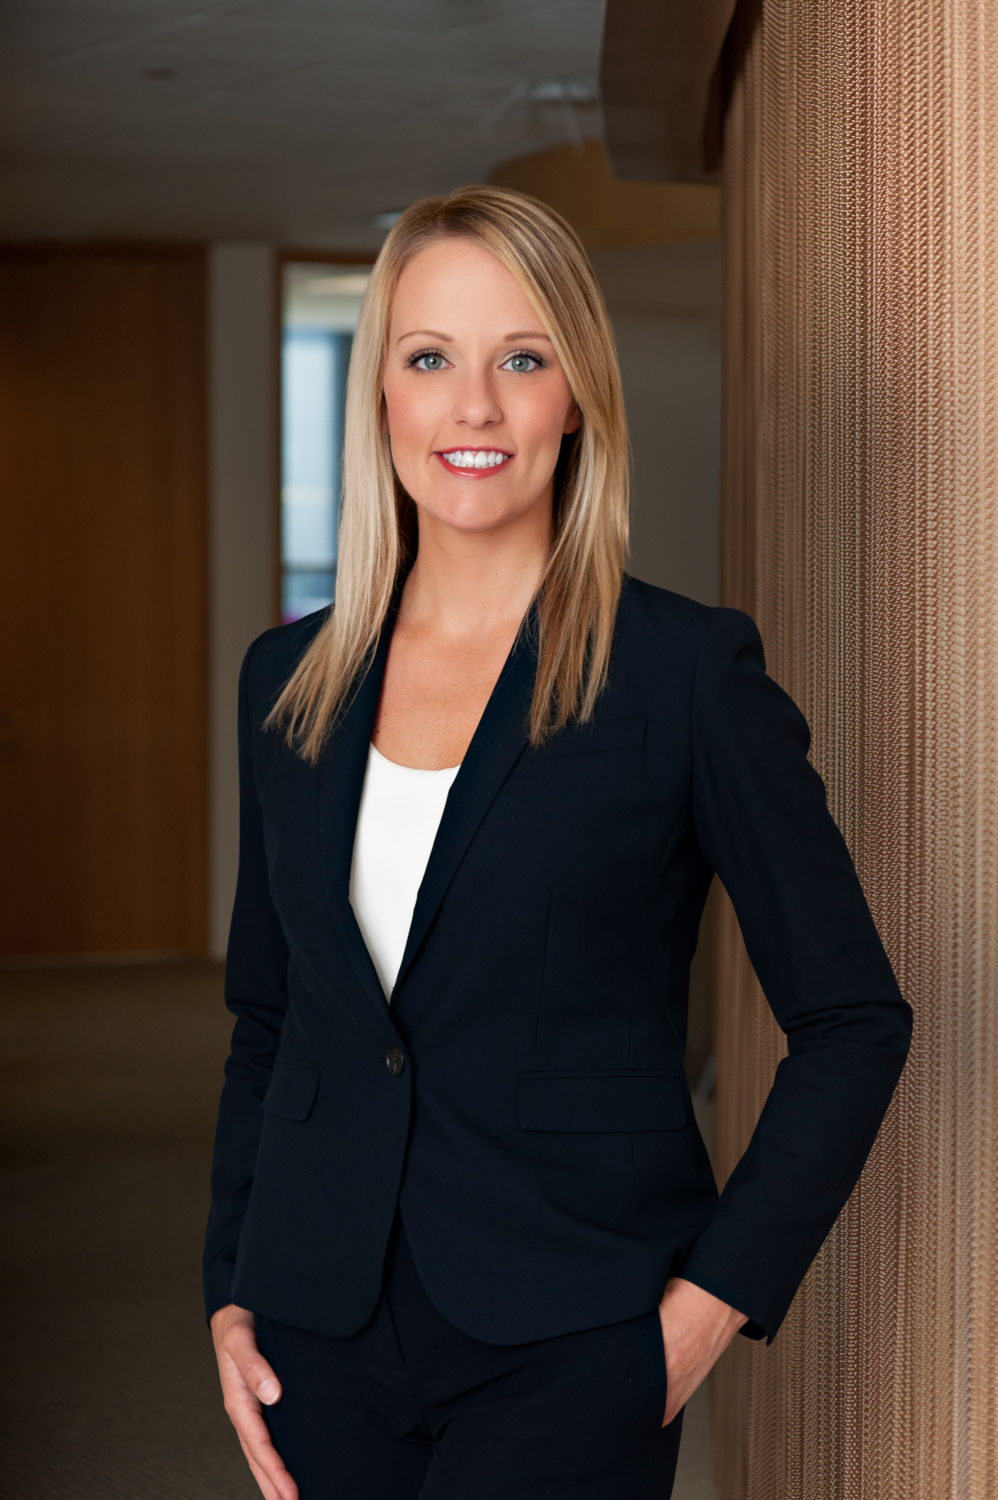 Professional portrait of Amanda Crain, attorney. She stands in a black suit in the hallway of a well lit office, meeting the camera with a confident gaze and smile. 